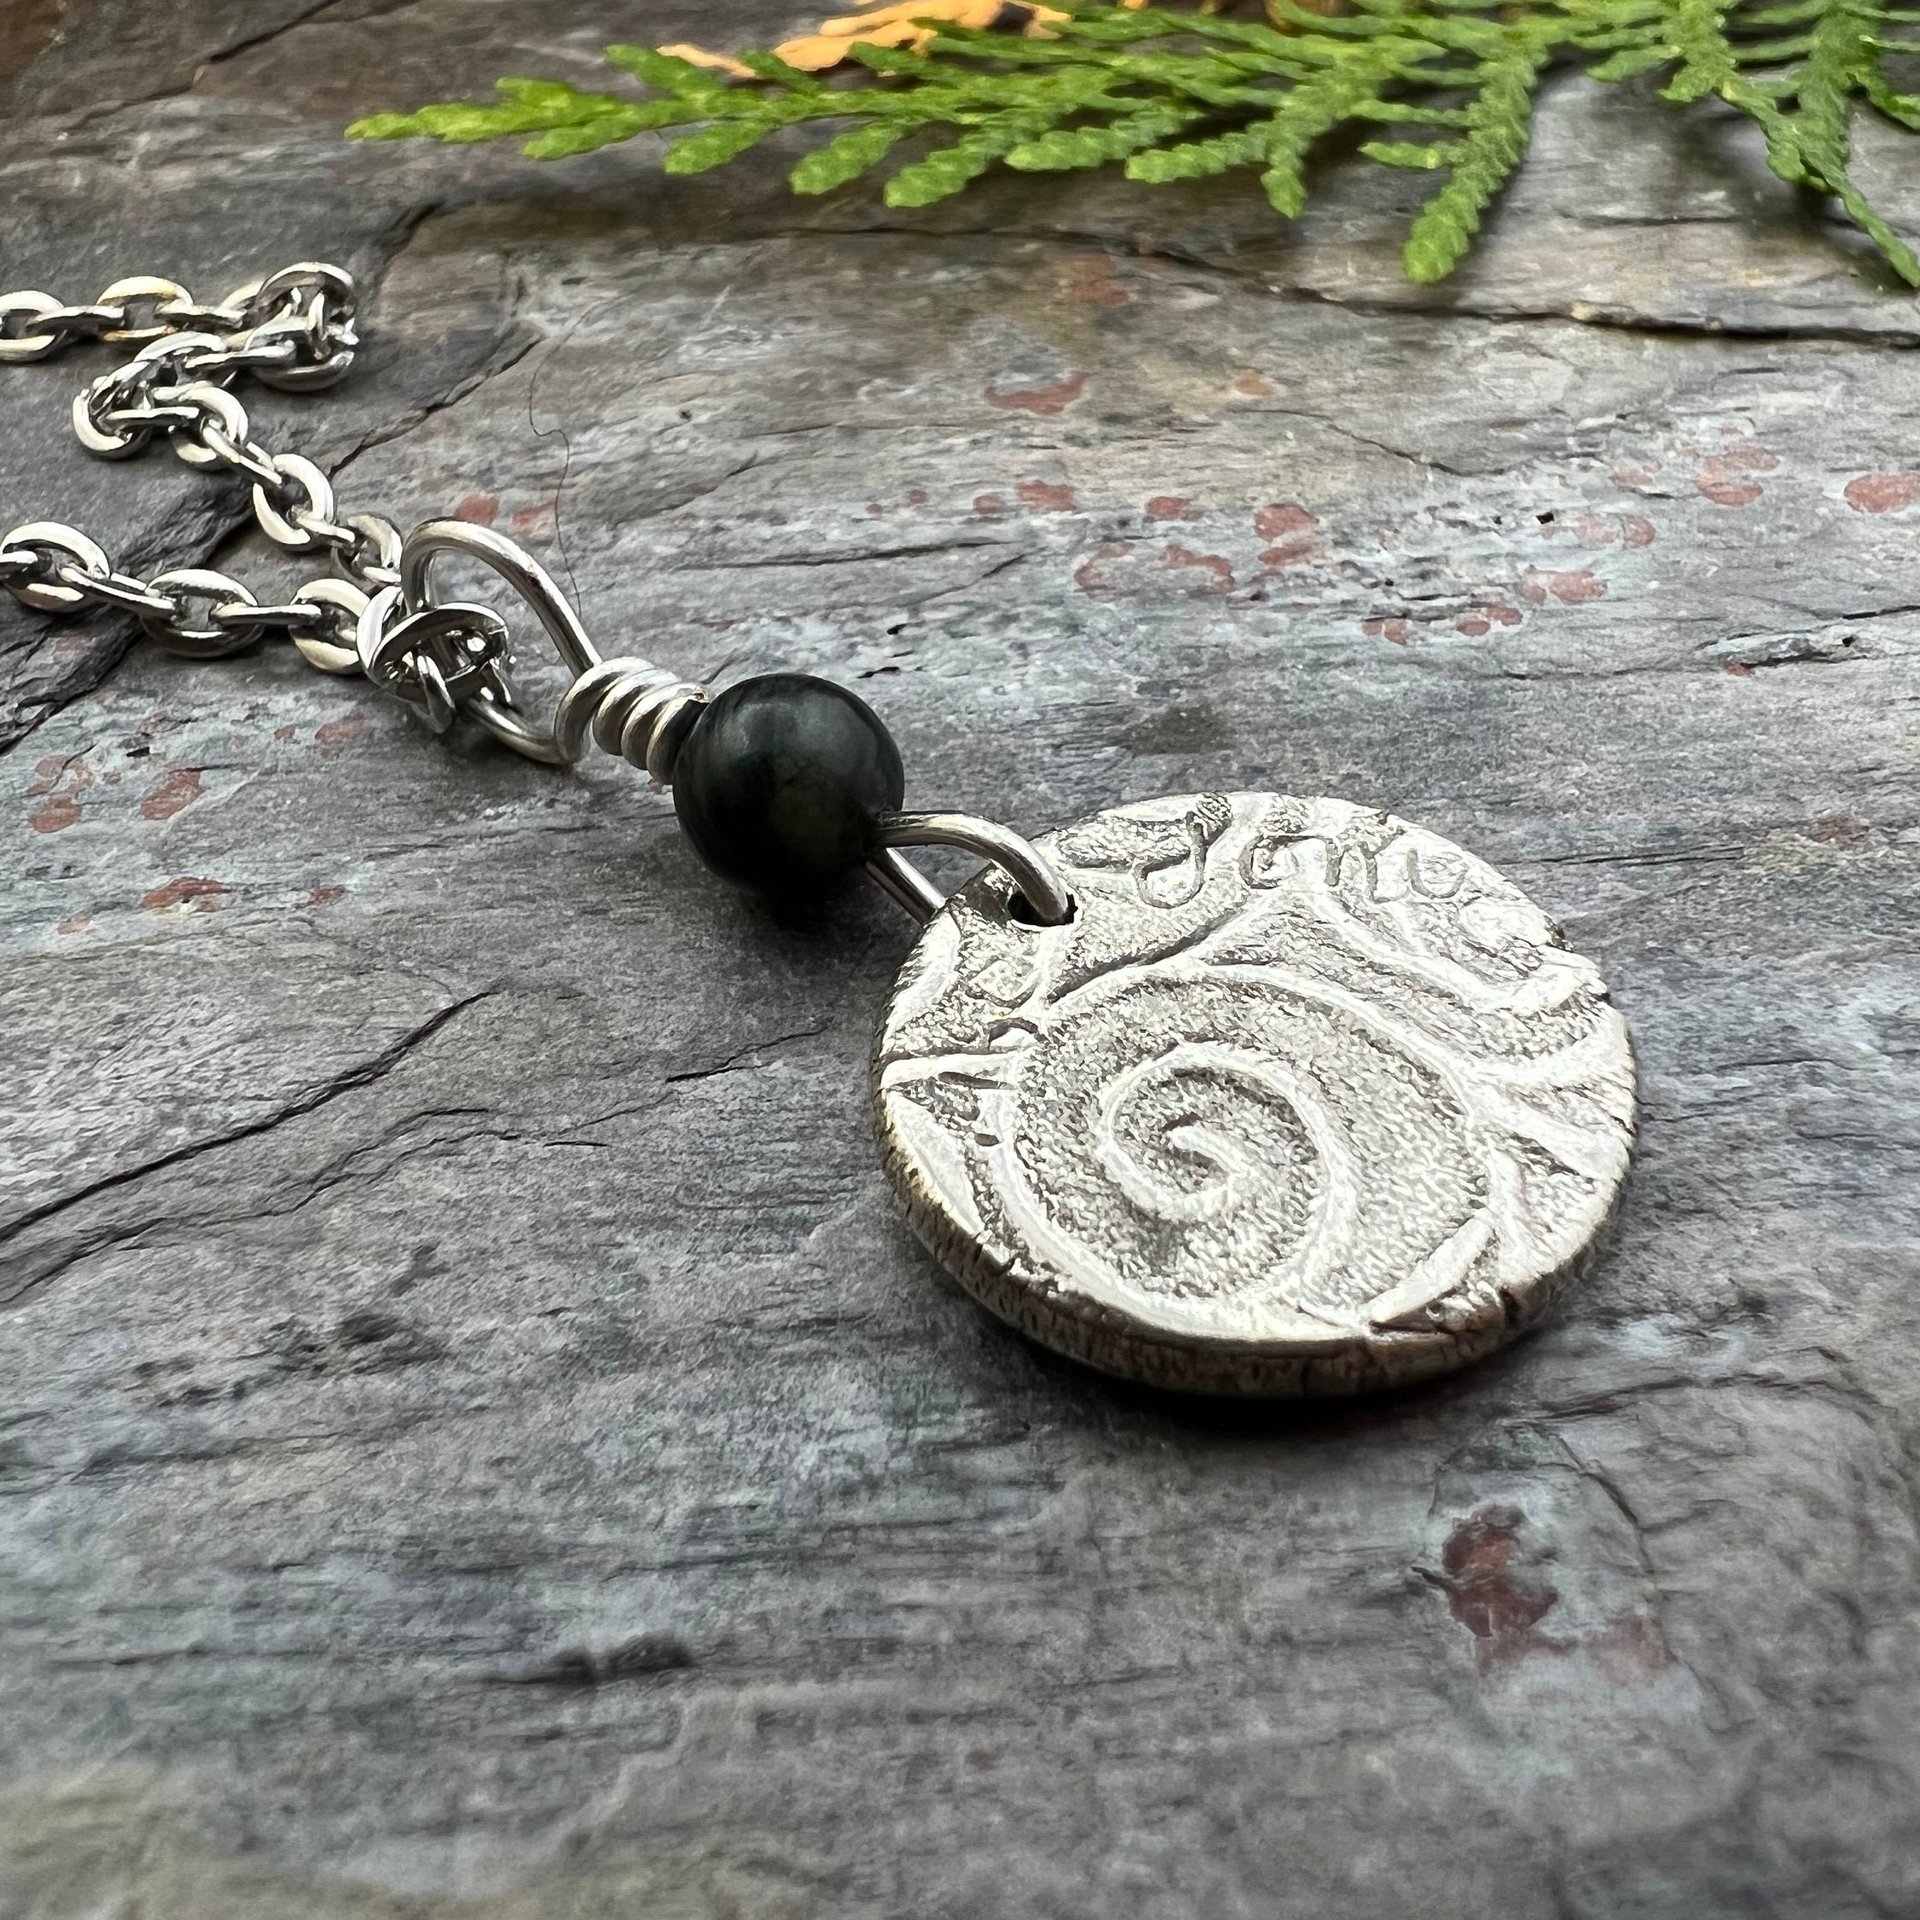 Raven Charm, Sterling Silver, Kilkenny Black Marble, Irish Celtic Jewelry, Wax Seal Charm, Leather & Vegan Cords, Stainless Chains, Handmade